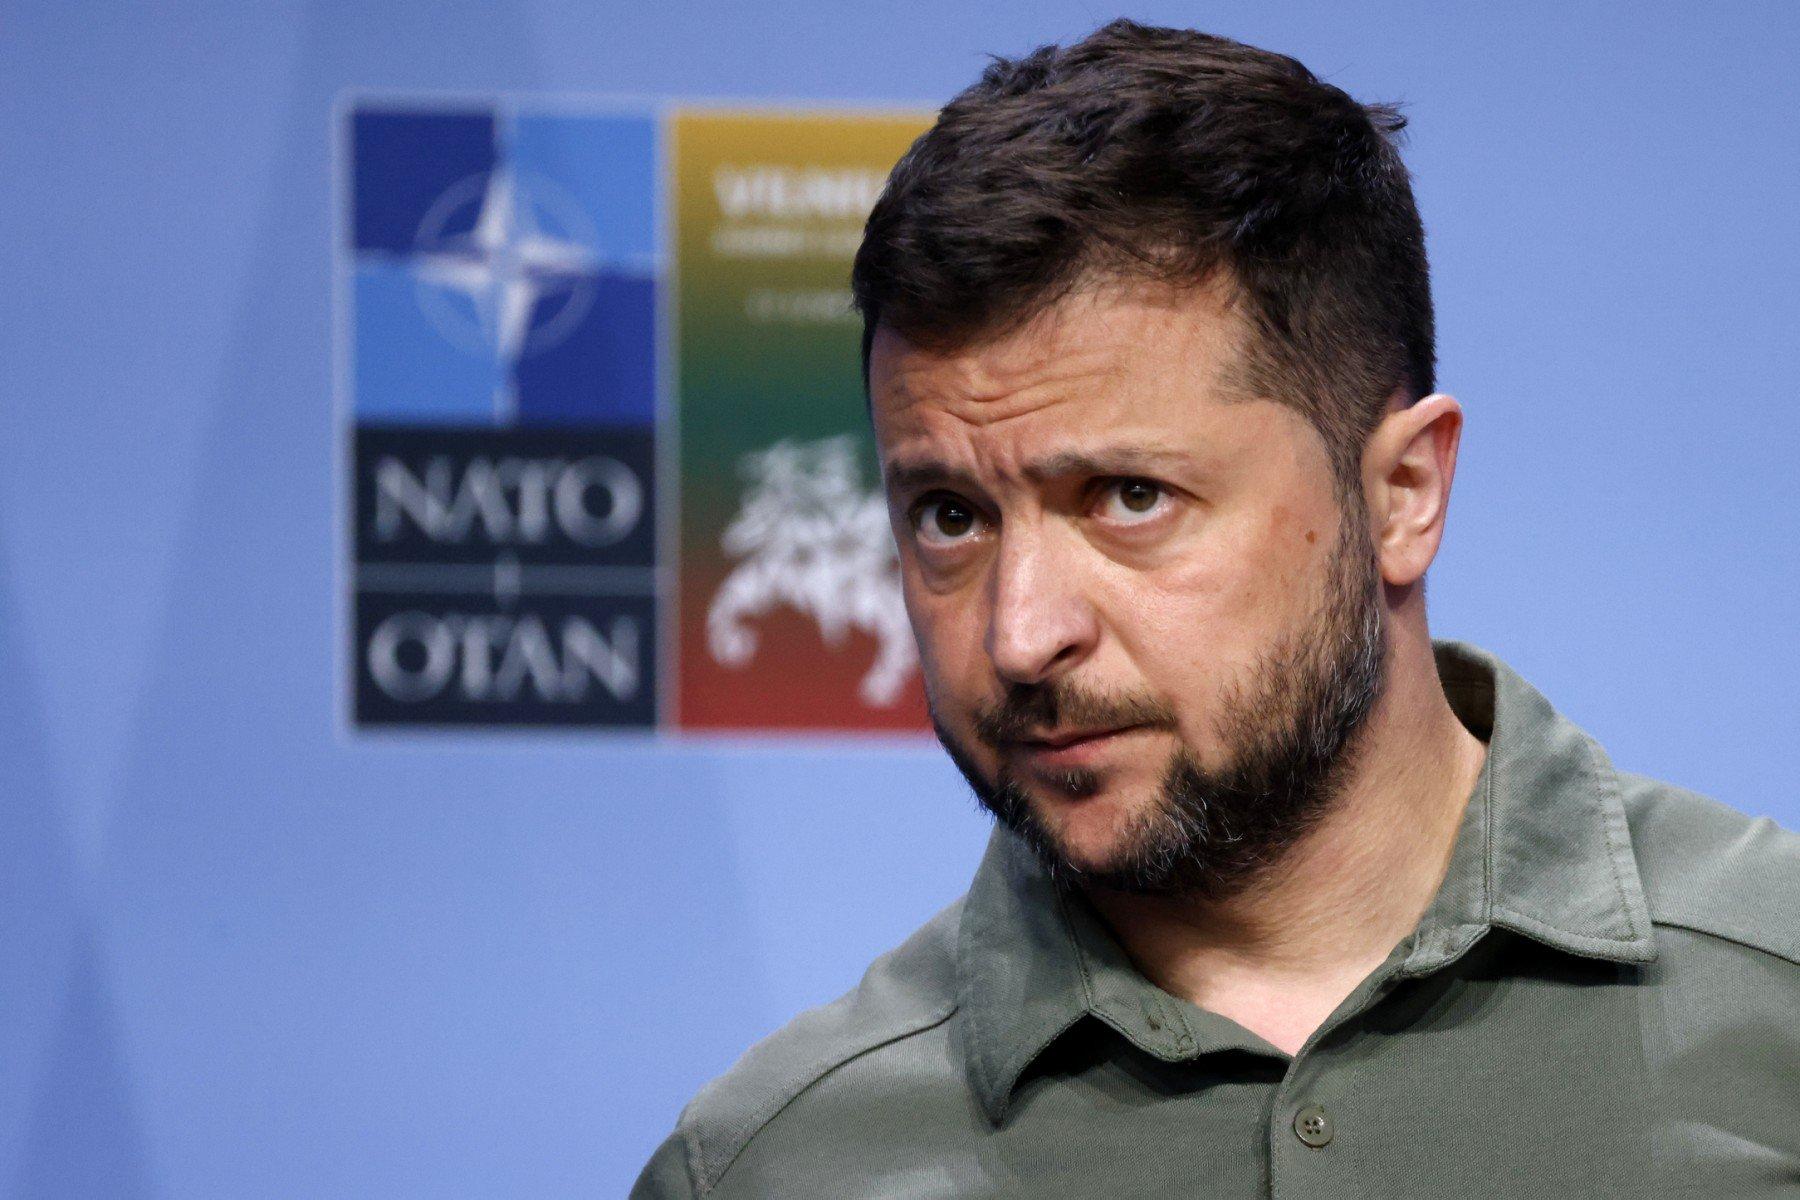 Ukraine's President Volodymyr Zelensky holds a press conference during the NATO Summit in Vilnius on July 12, 2023. (Photo by LUDOVIC MARIN / AFP)